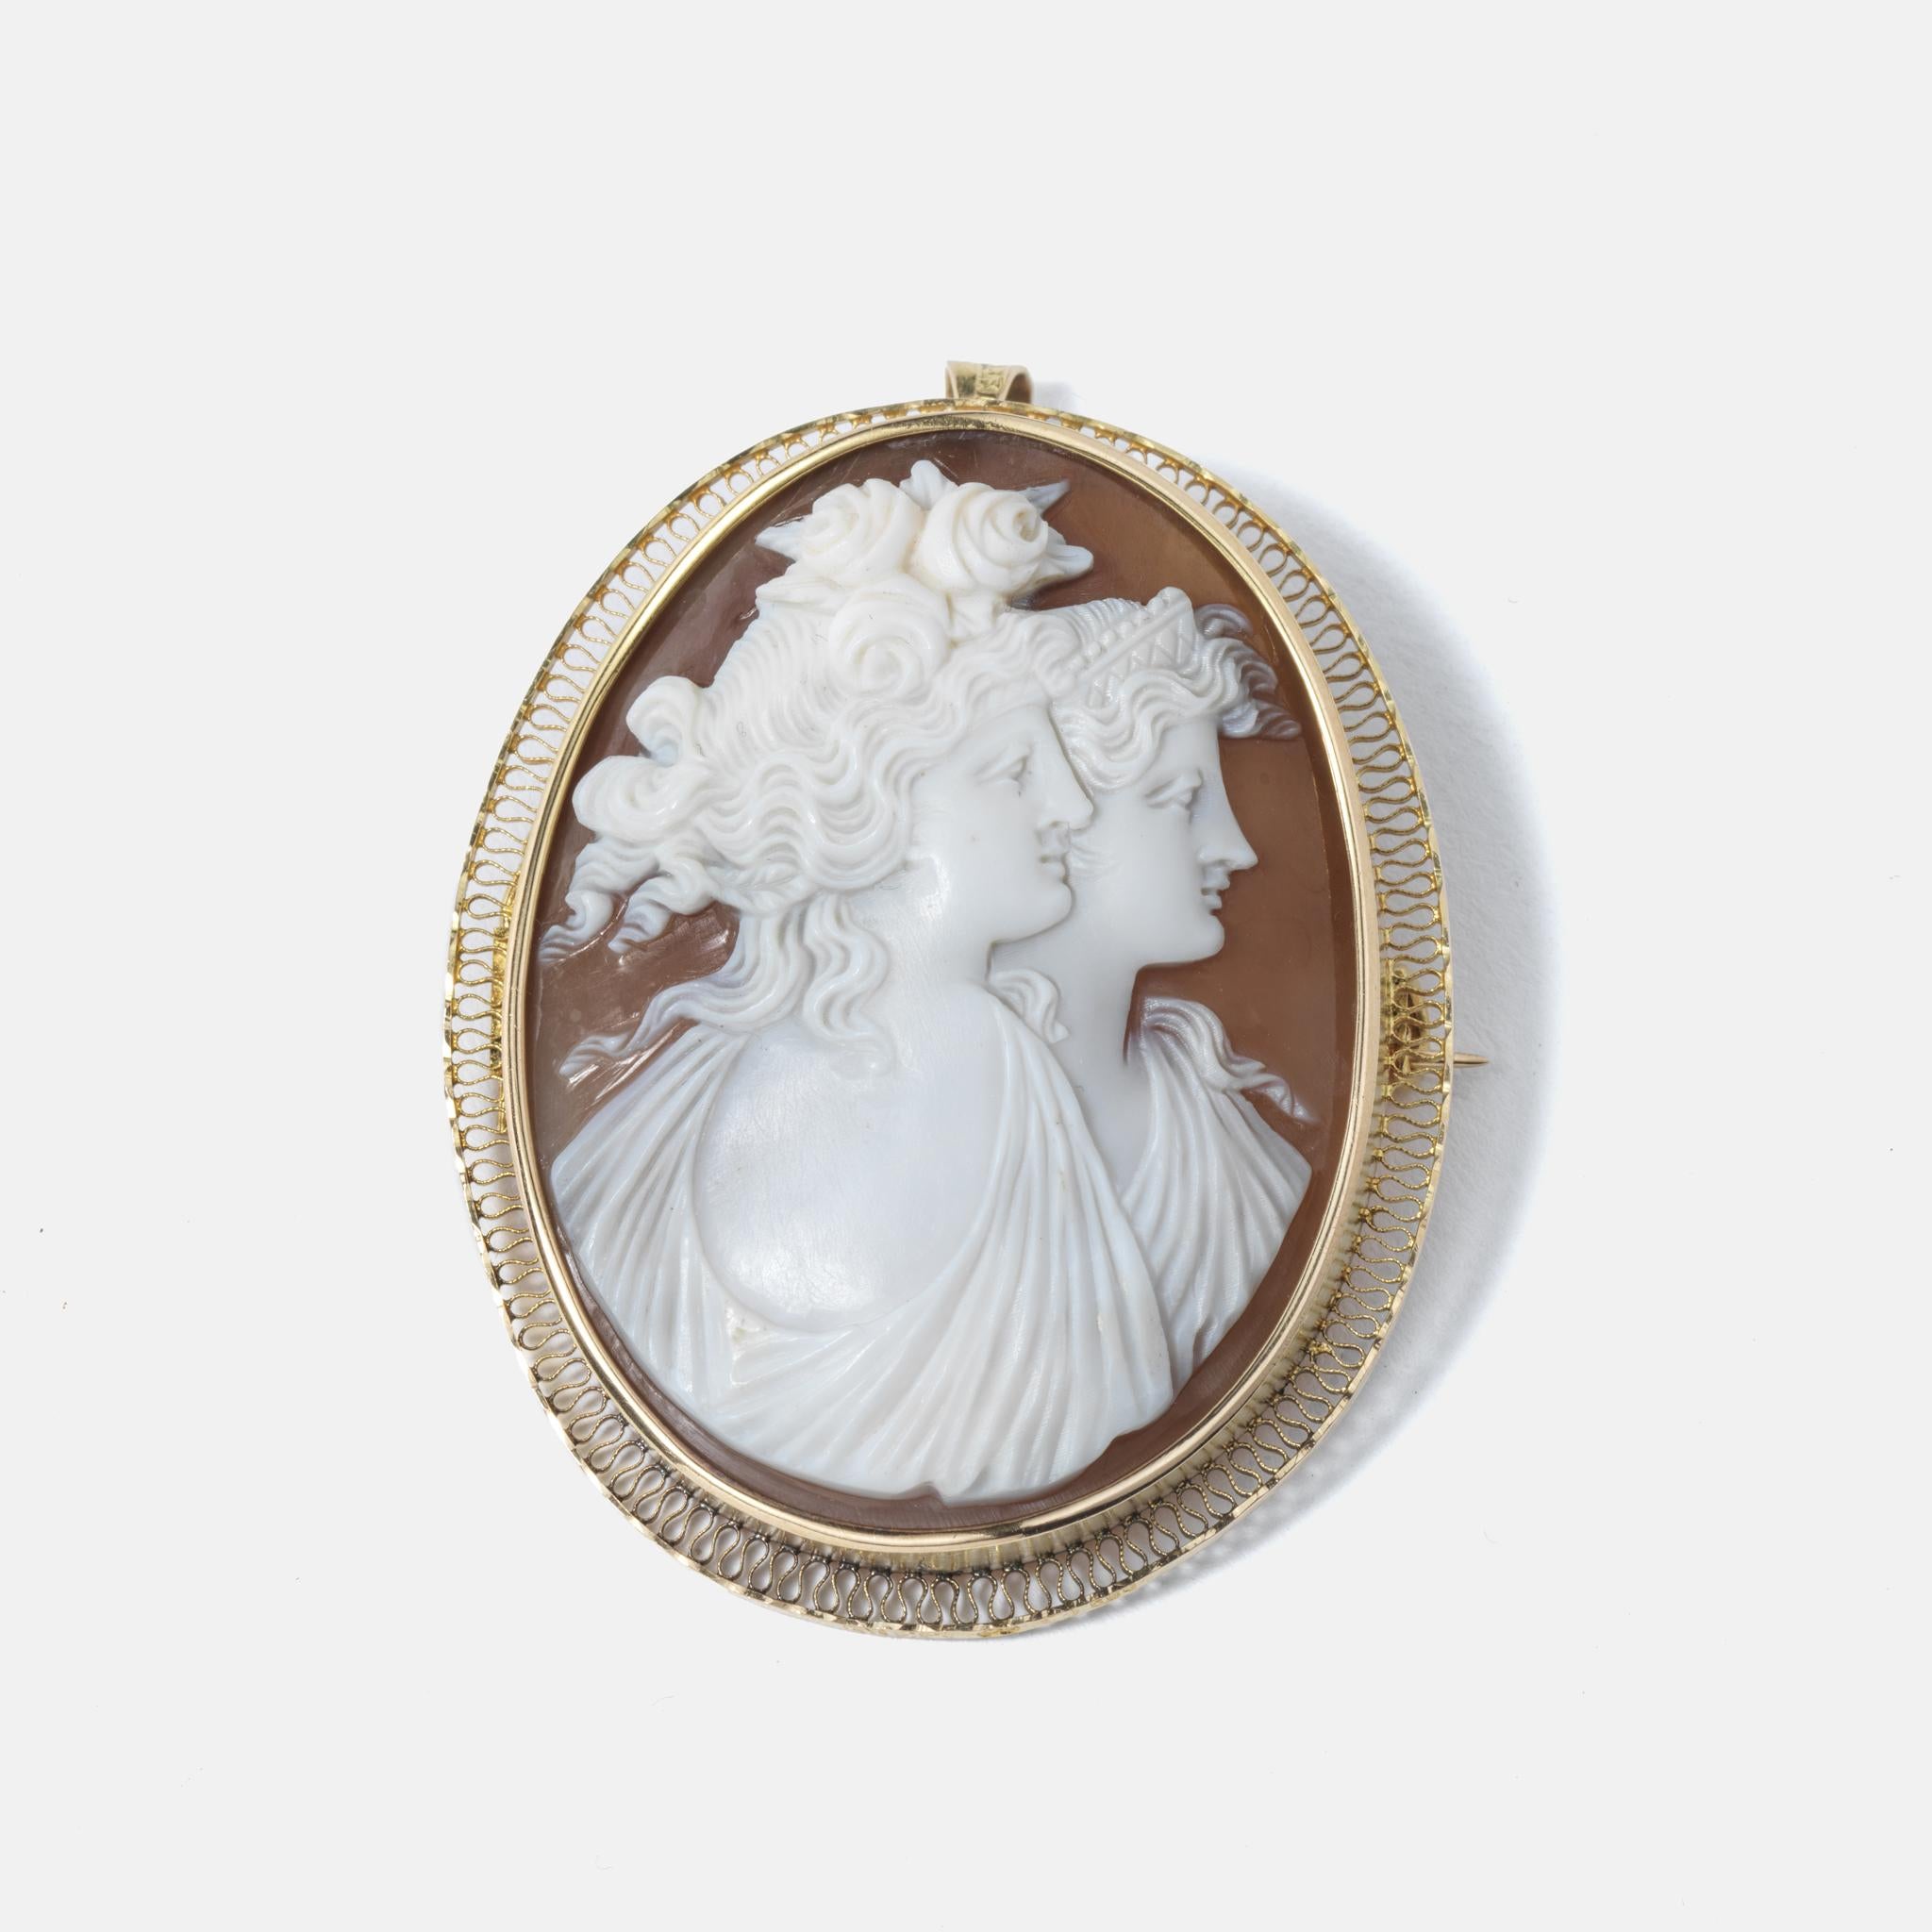 This 18 karat gold brooch/pendant is adorned with a shell cameo which features stunning details, beautiful, strong women in profile. The brooch/pendant has a classic look making it available for all preferences.

This is a quite large piece of